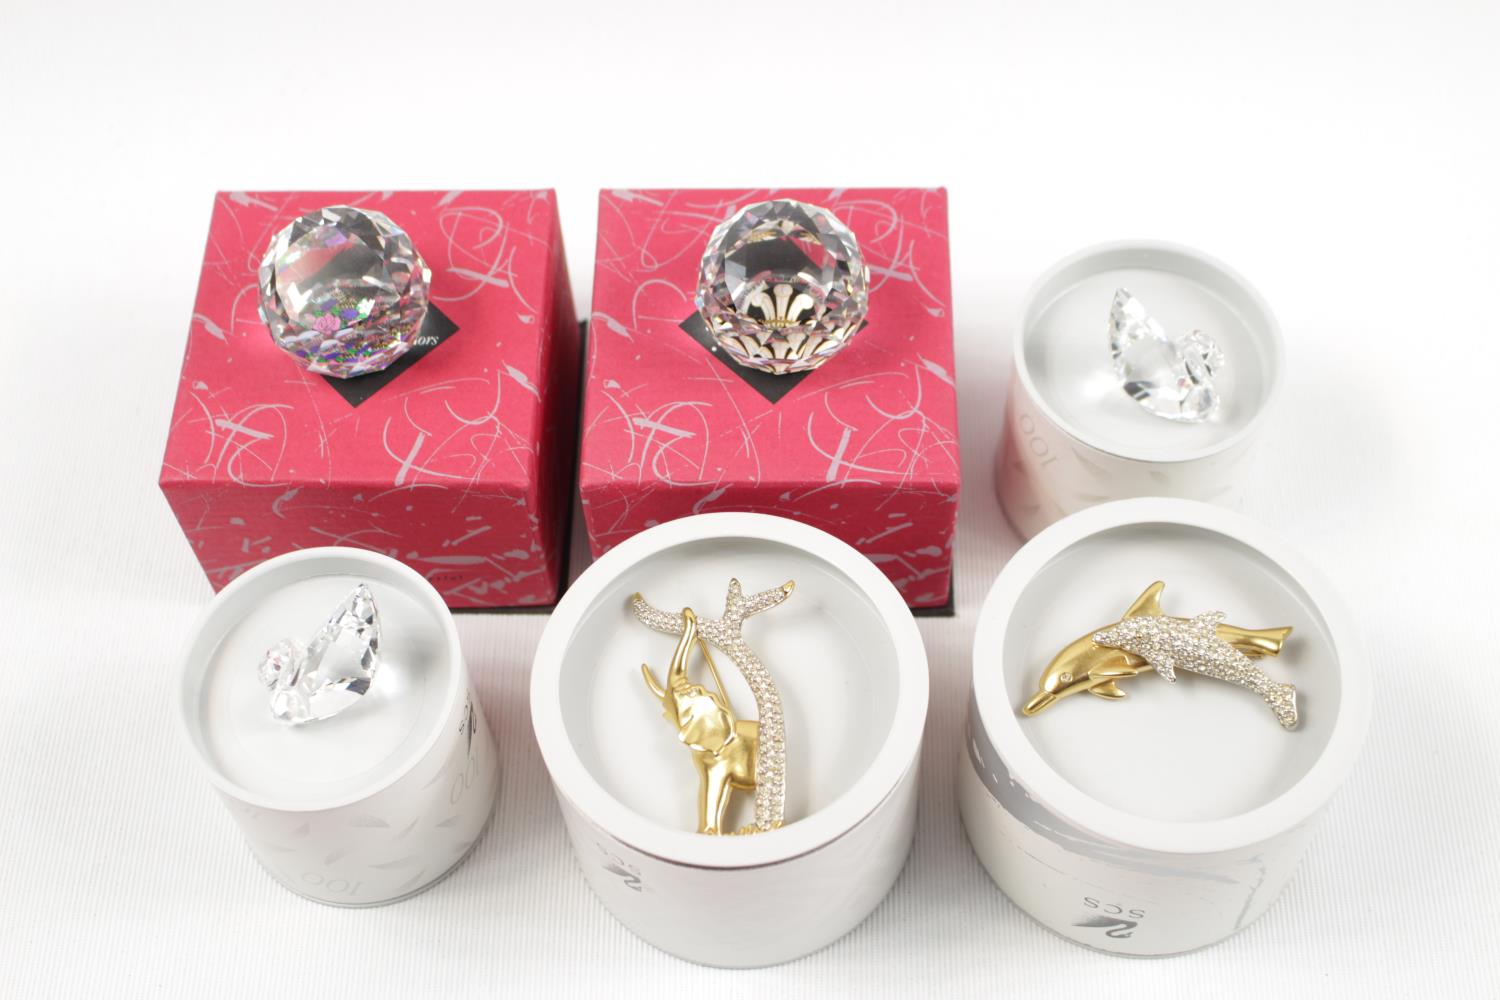 Collection of Swarovski Brooches and other items inc. 2 Boxed SCS Renewal Gift Swan 1 & 2 - 1995,